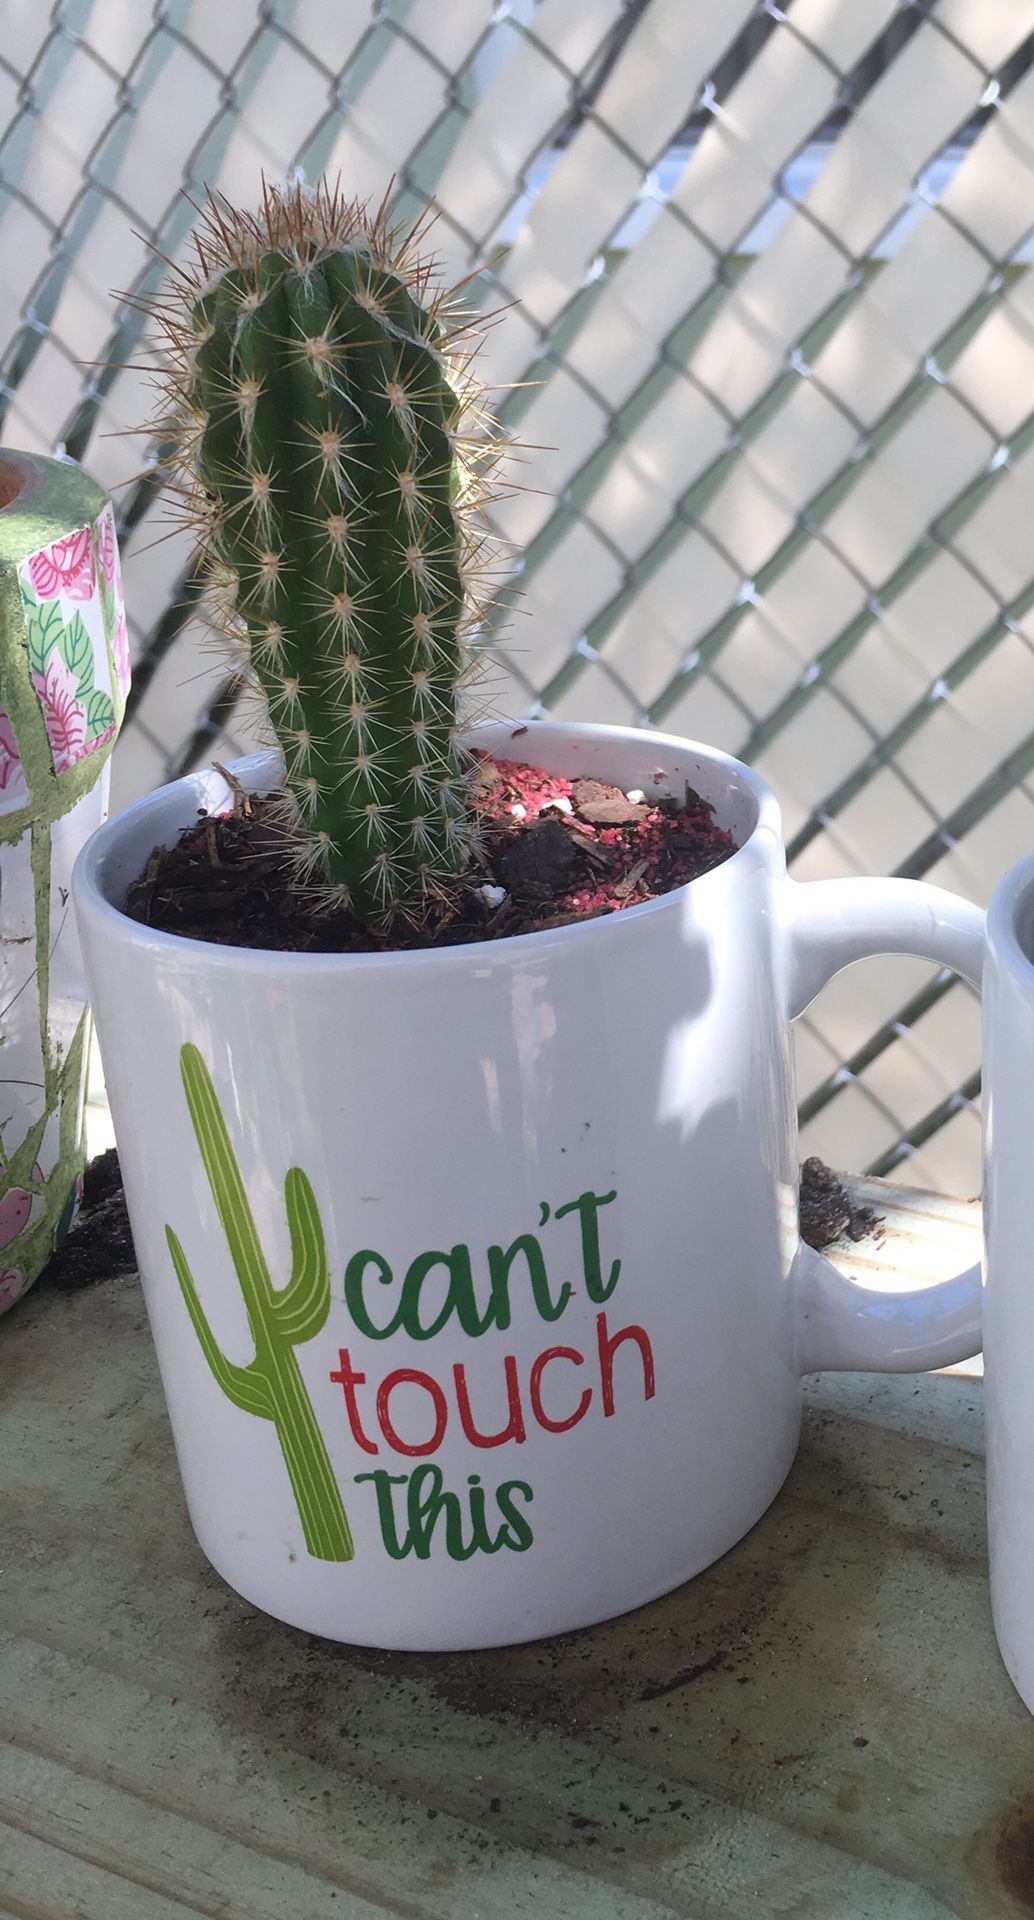 Cylindrical Cactus in “Can’t Touch tThis” humorous mug.